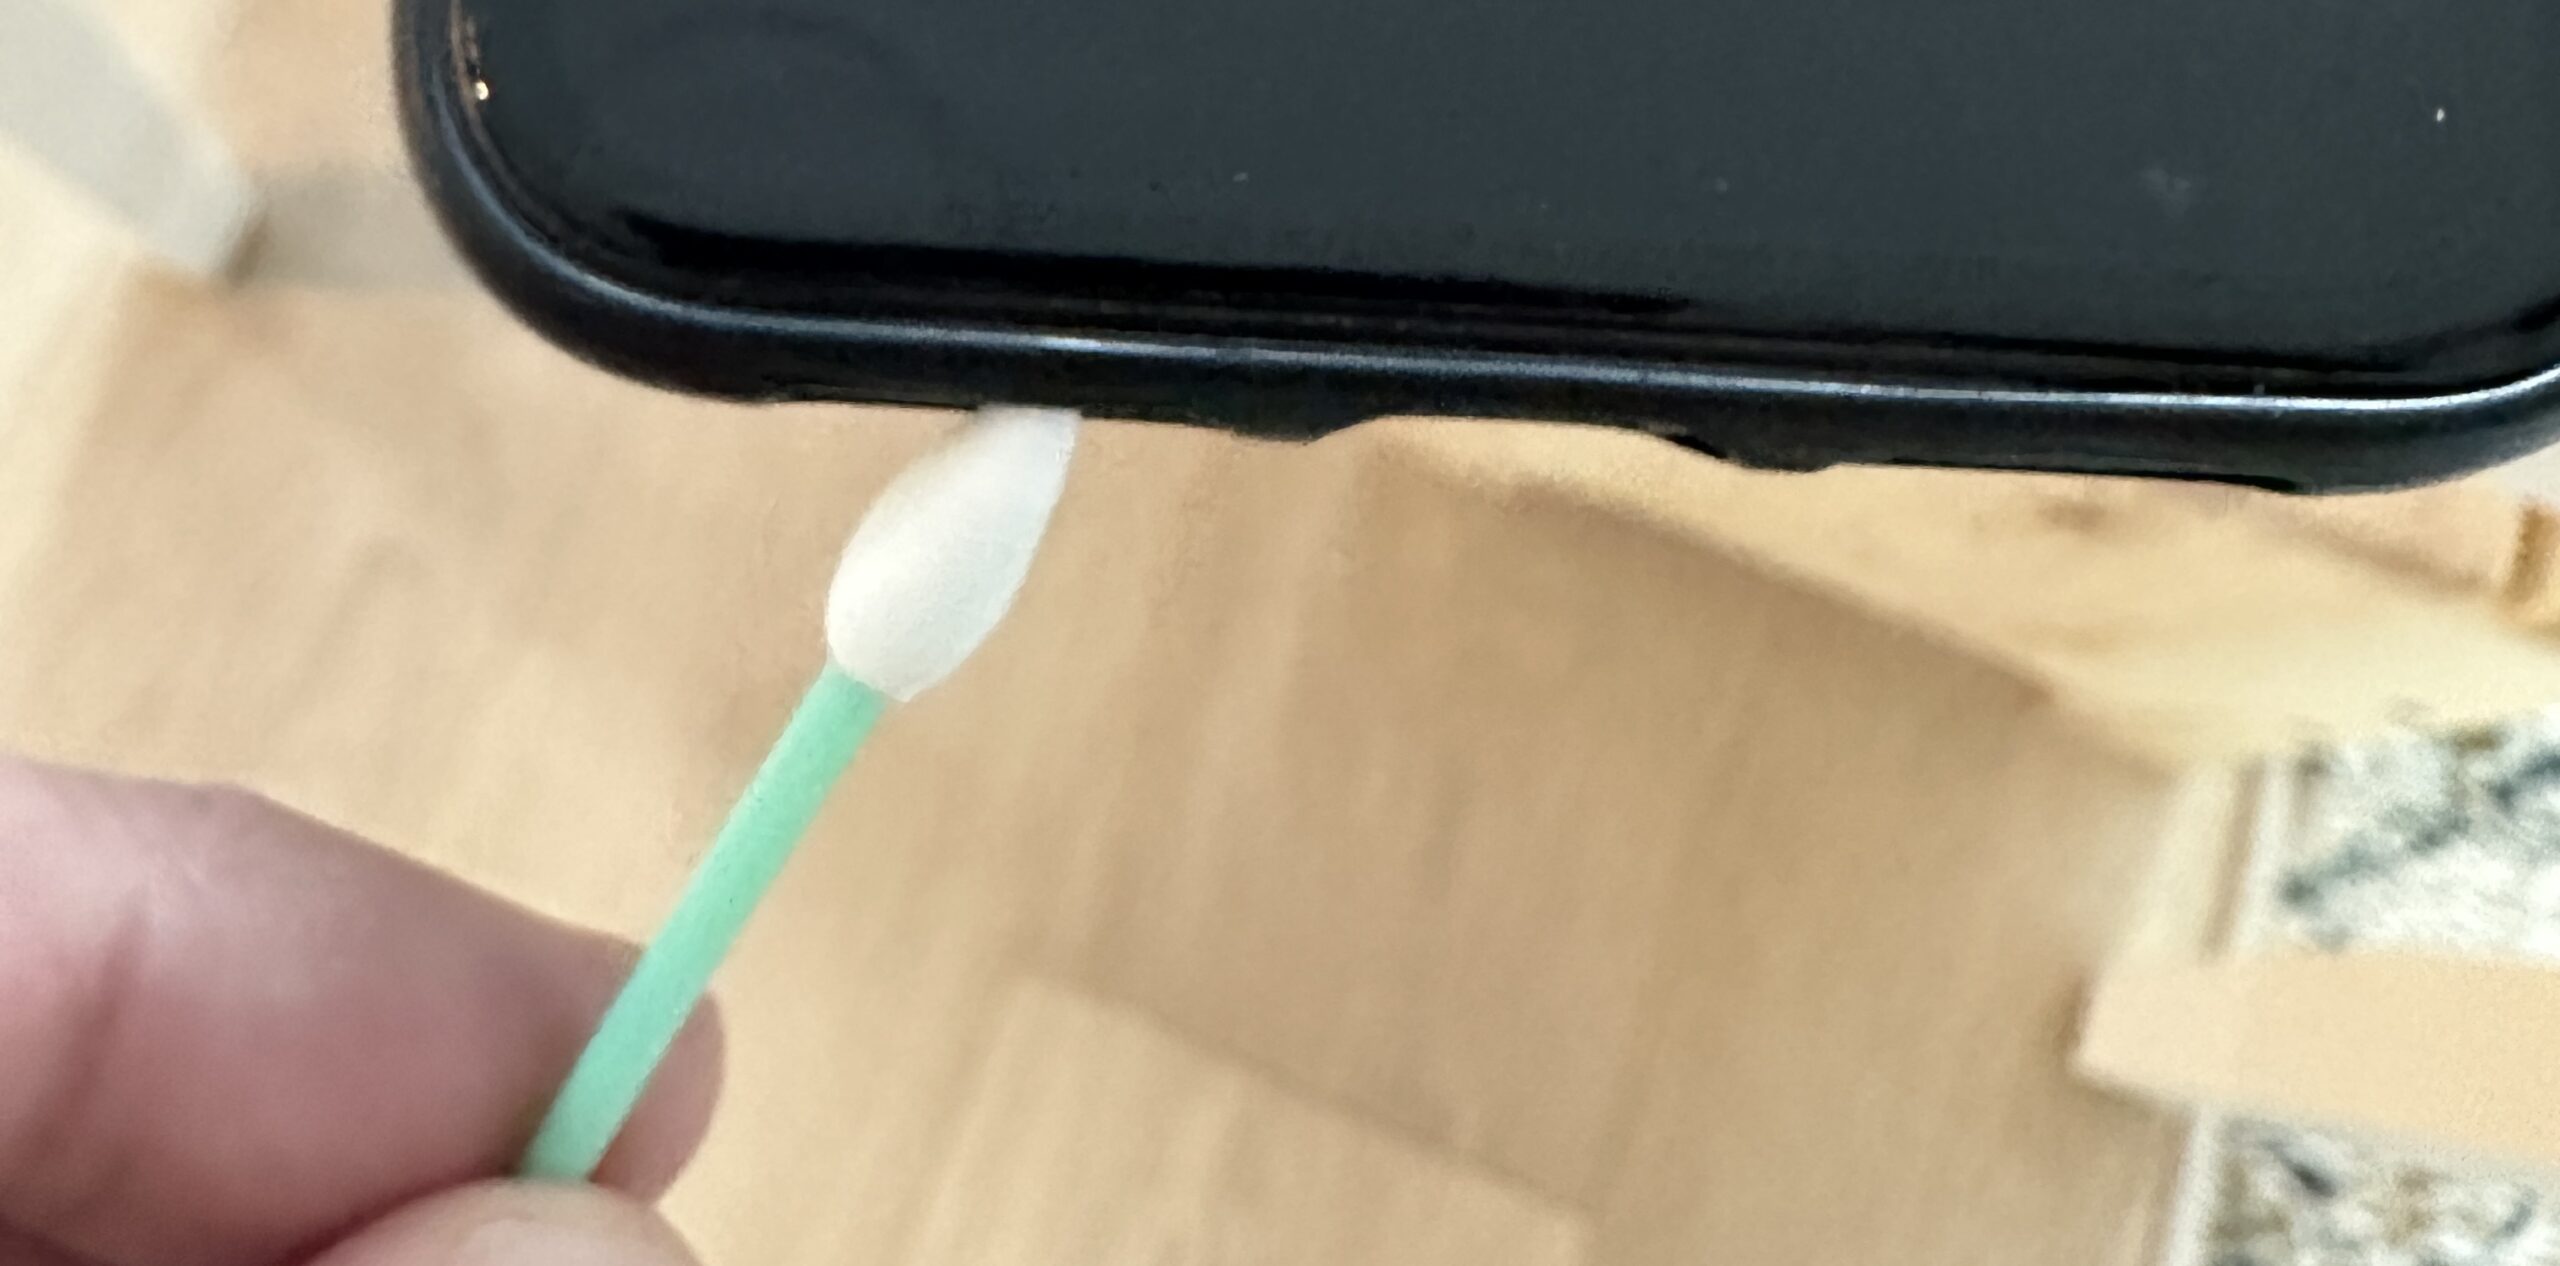 Using a q-tip to clean iPhone speakers